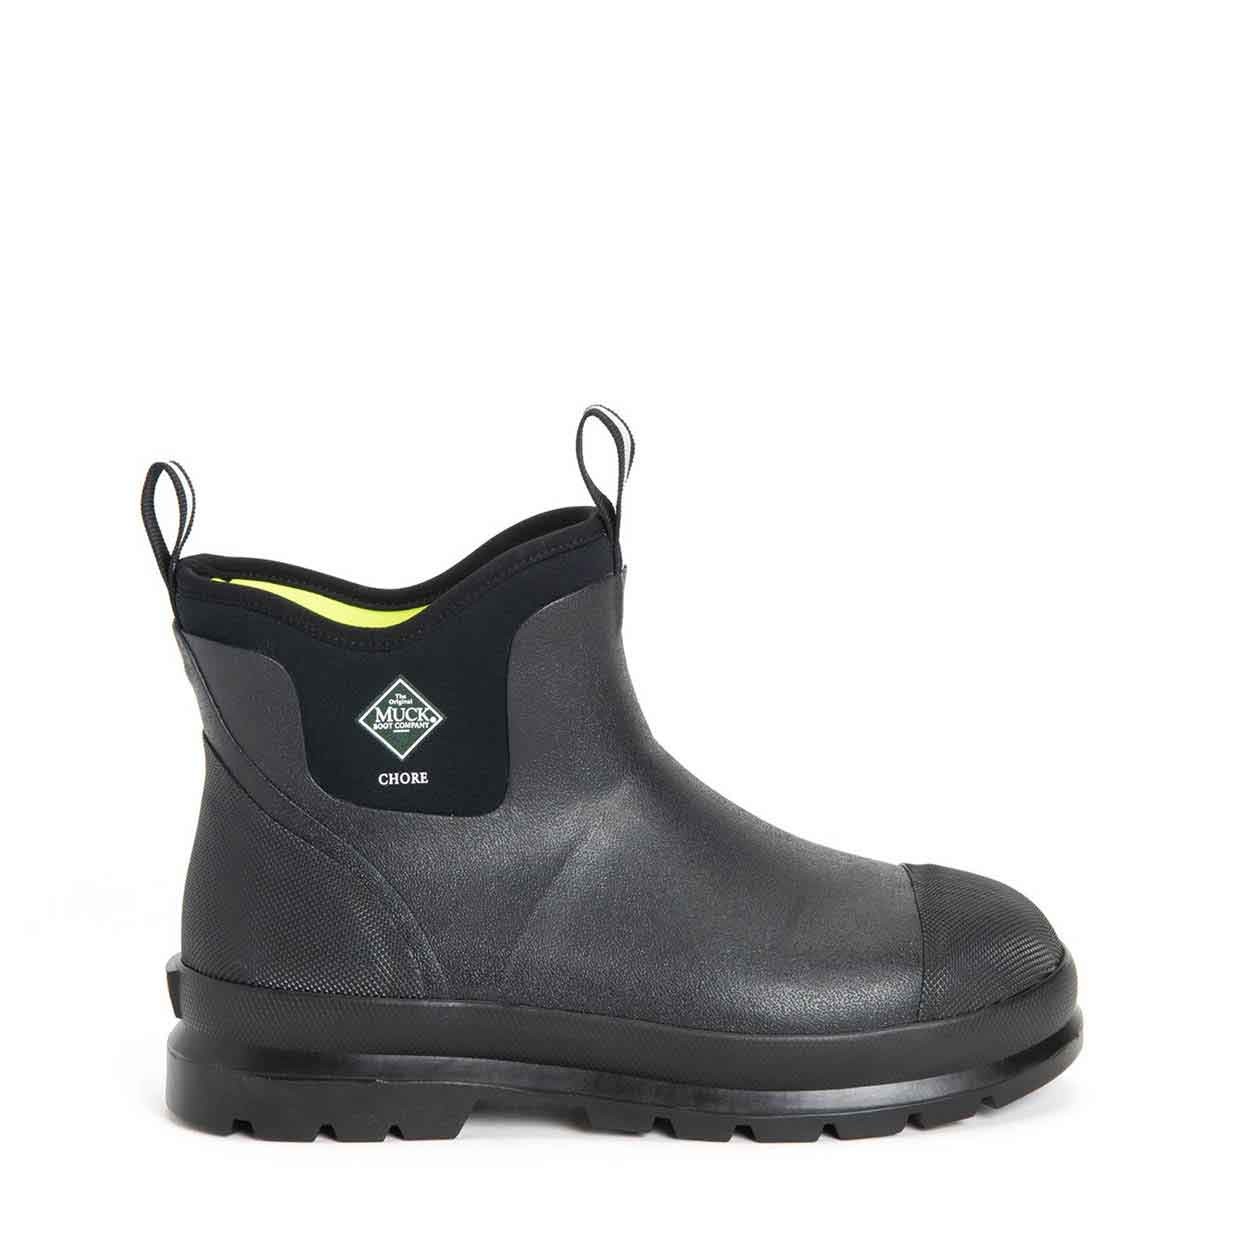 Muck Boots Chore Classic Chelsea - Non-Safety Wellingtons - Safety Footwear  - Best Workwear